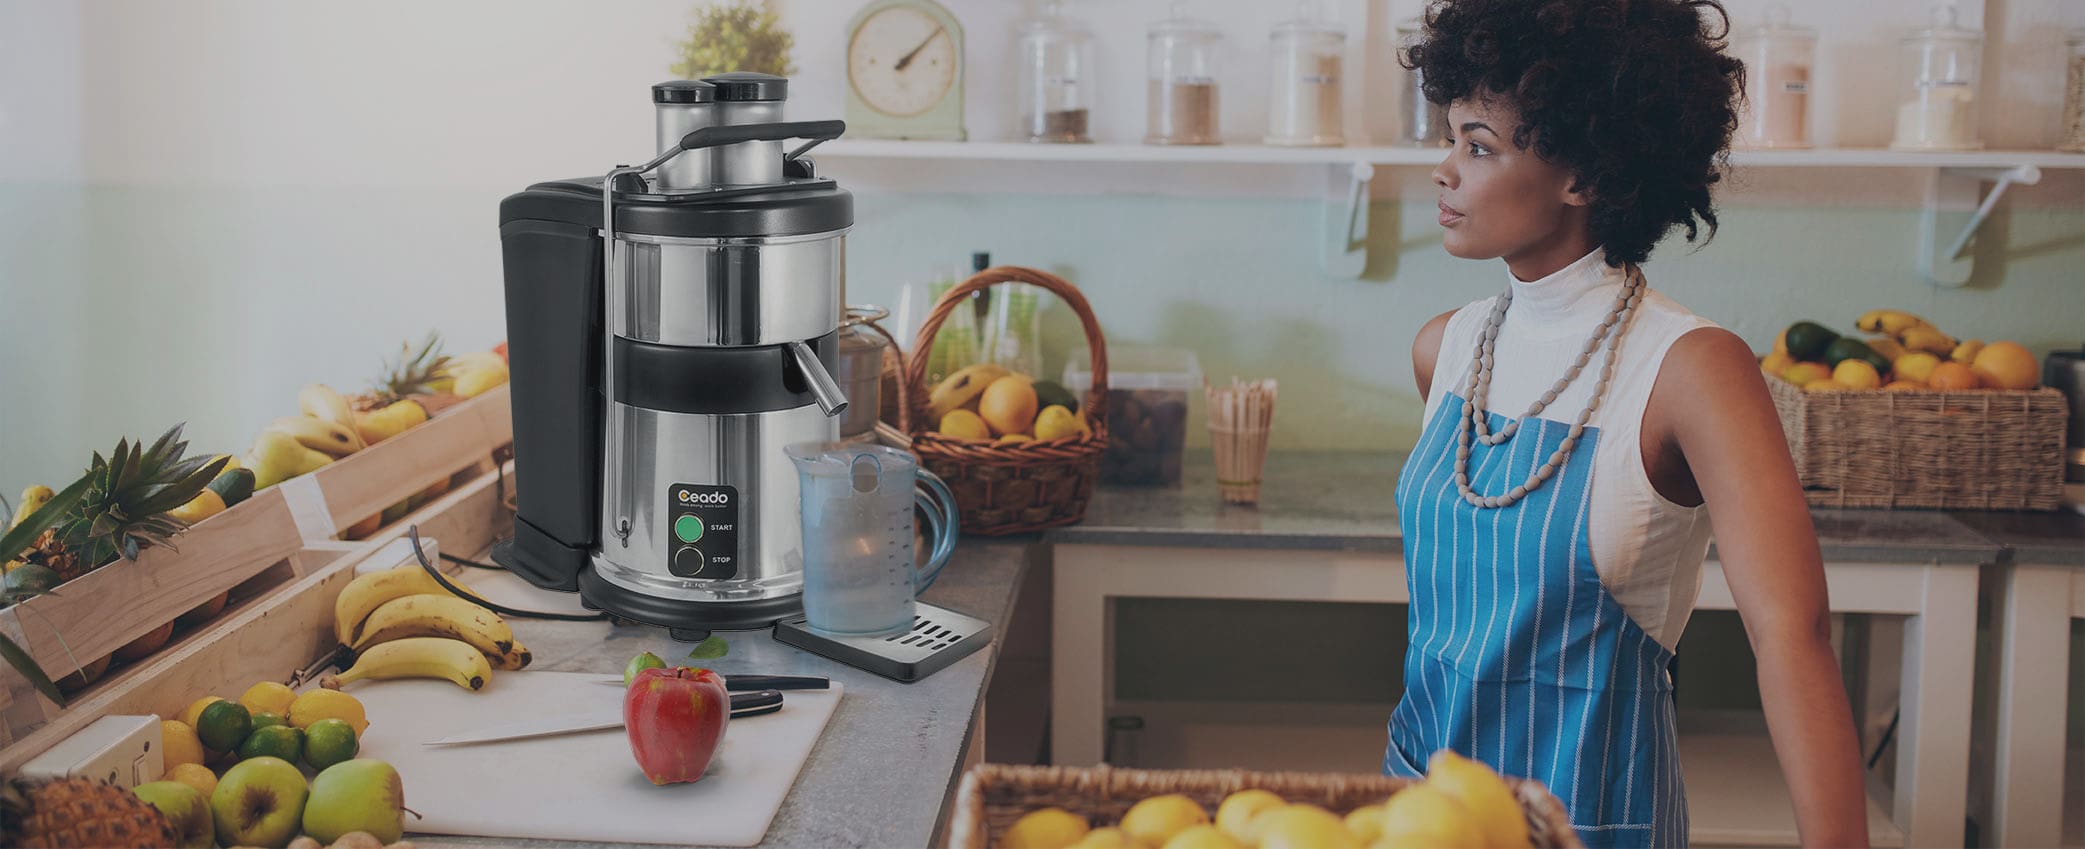 Image of a commercial juicer on top of the counter of a juice bar